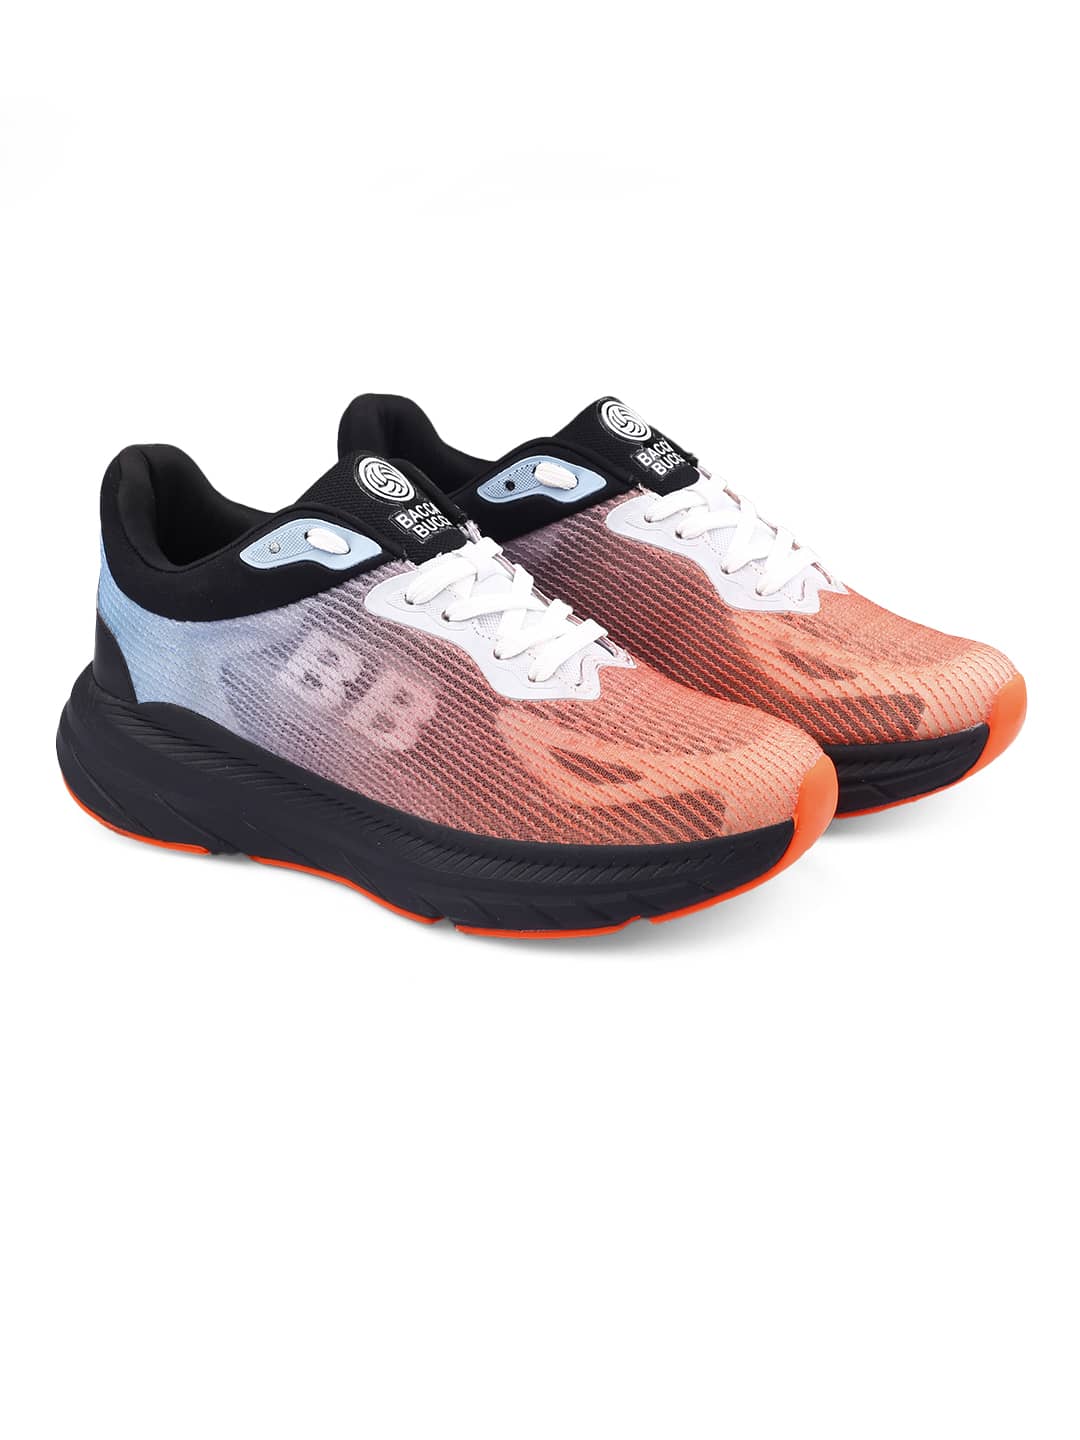 Bacca Bucci FLUX PIONEERS - Premium Gradient Athleisure Sneakers with Dynamic Flex Sole for Urban Exploration